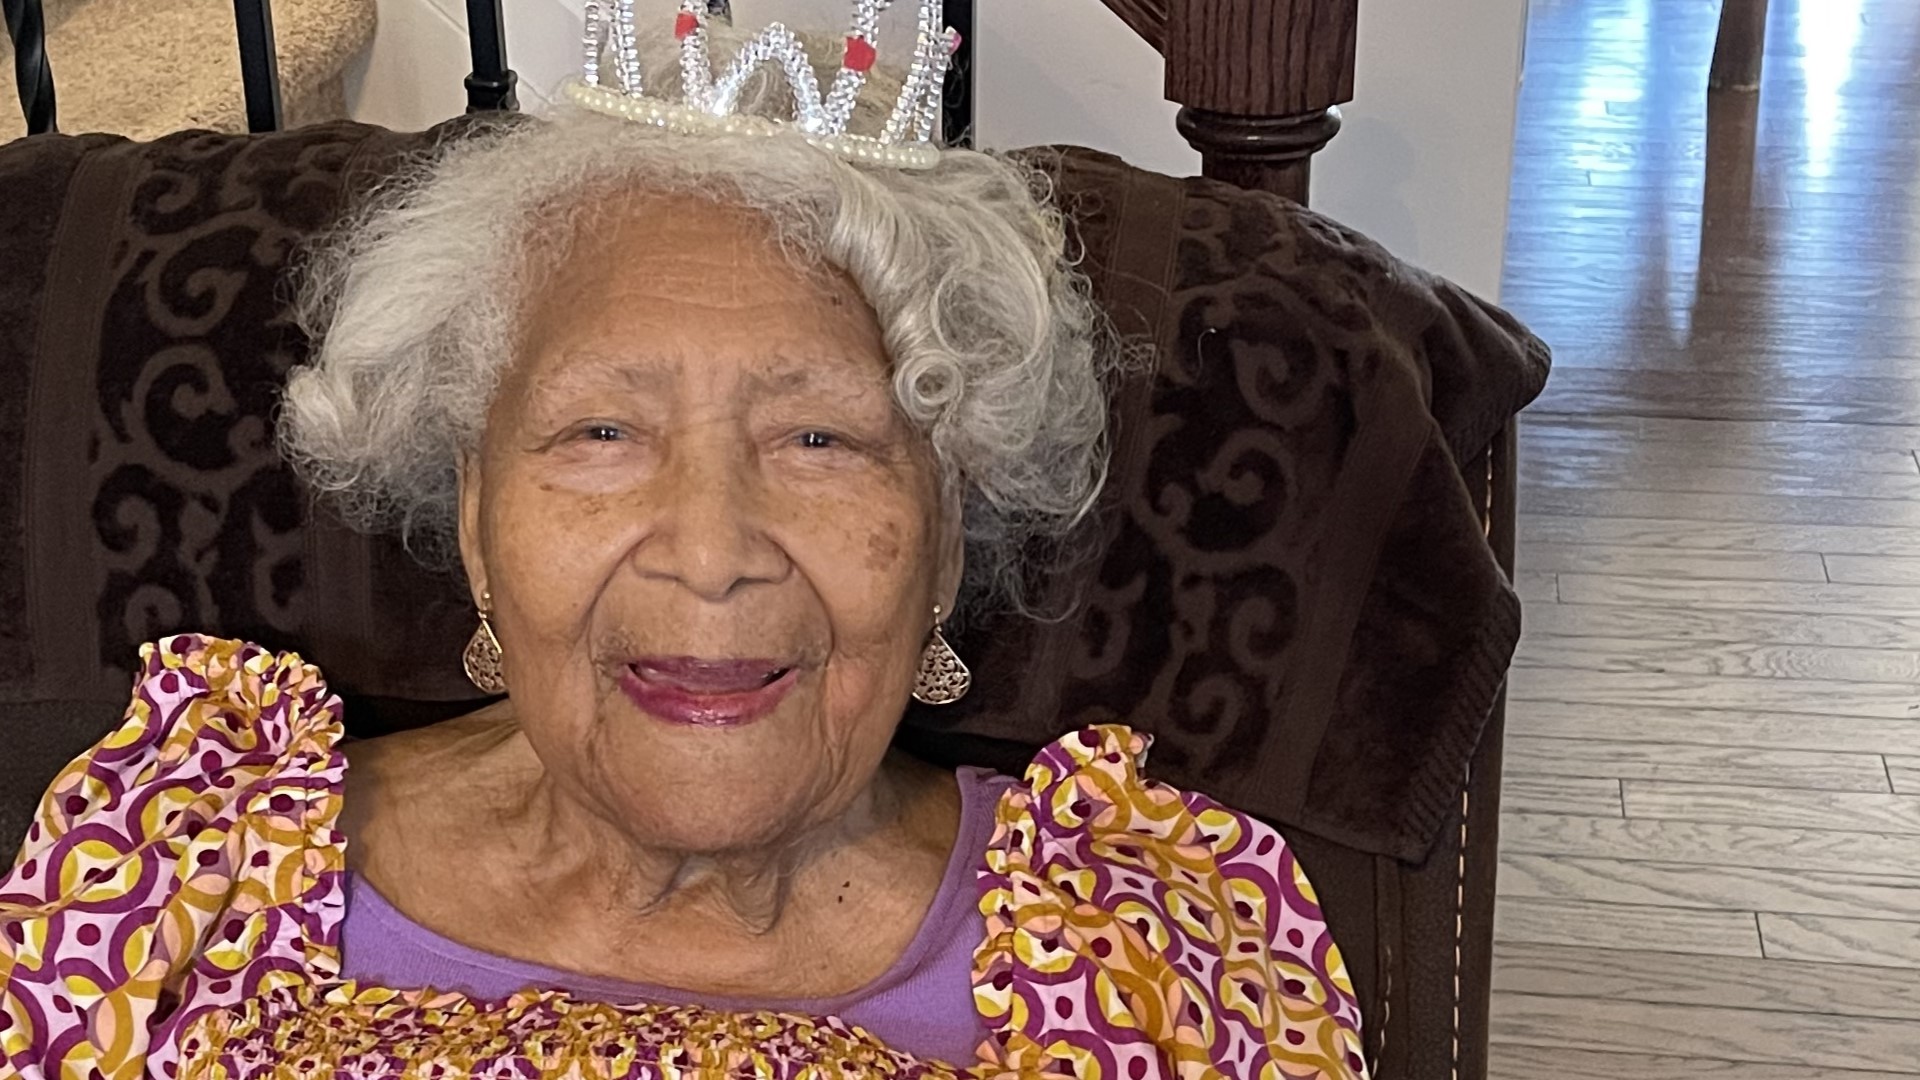 Born in 1917 to sharecroppers, Ms. Gussie spent her early years picking cotton on a plantation in South Carolina.